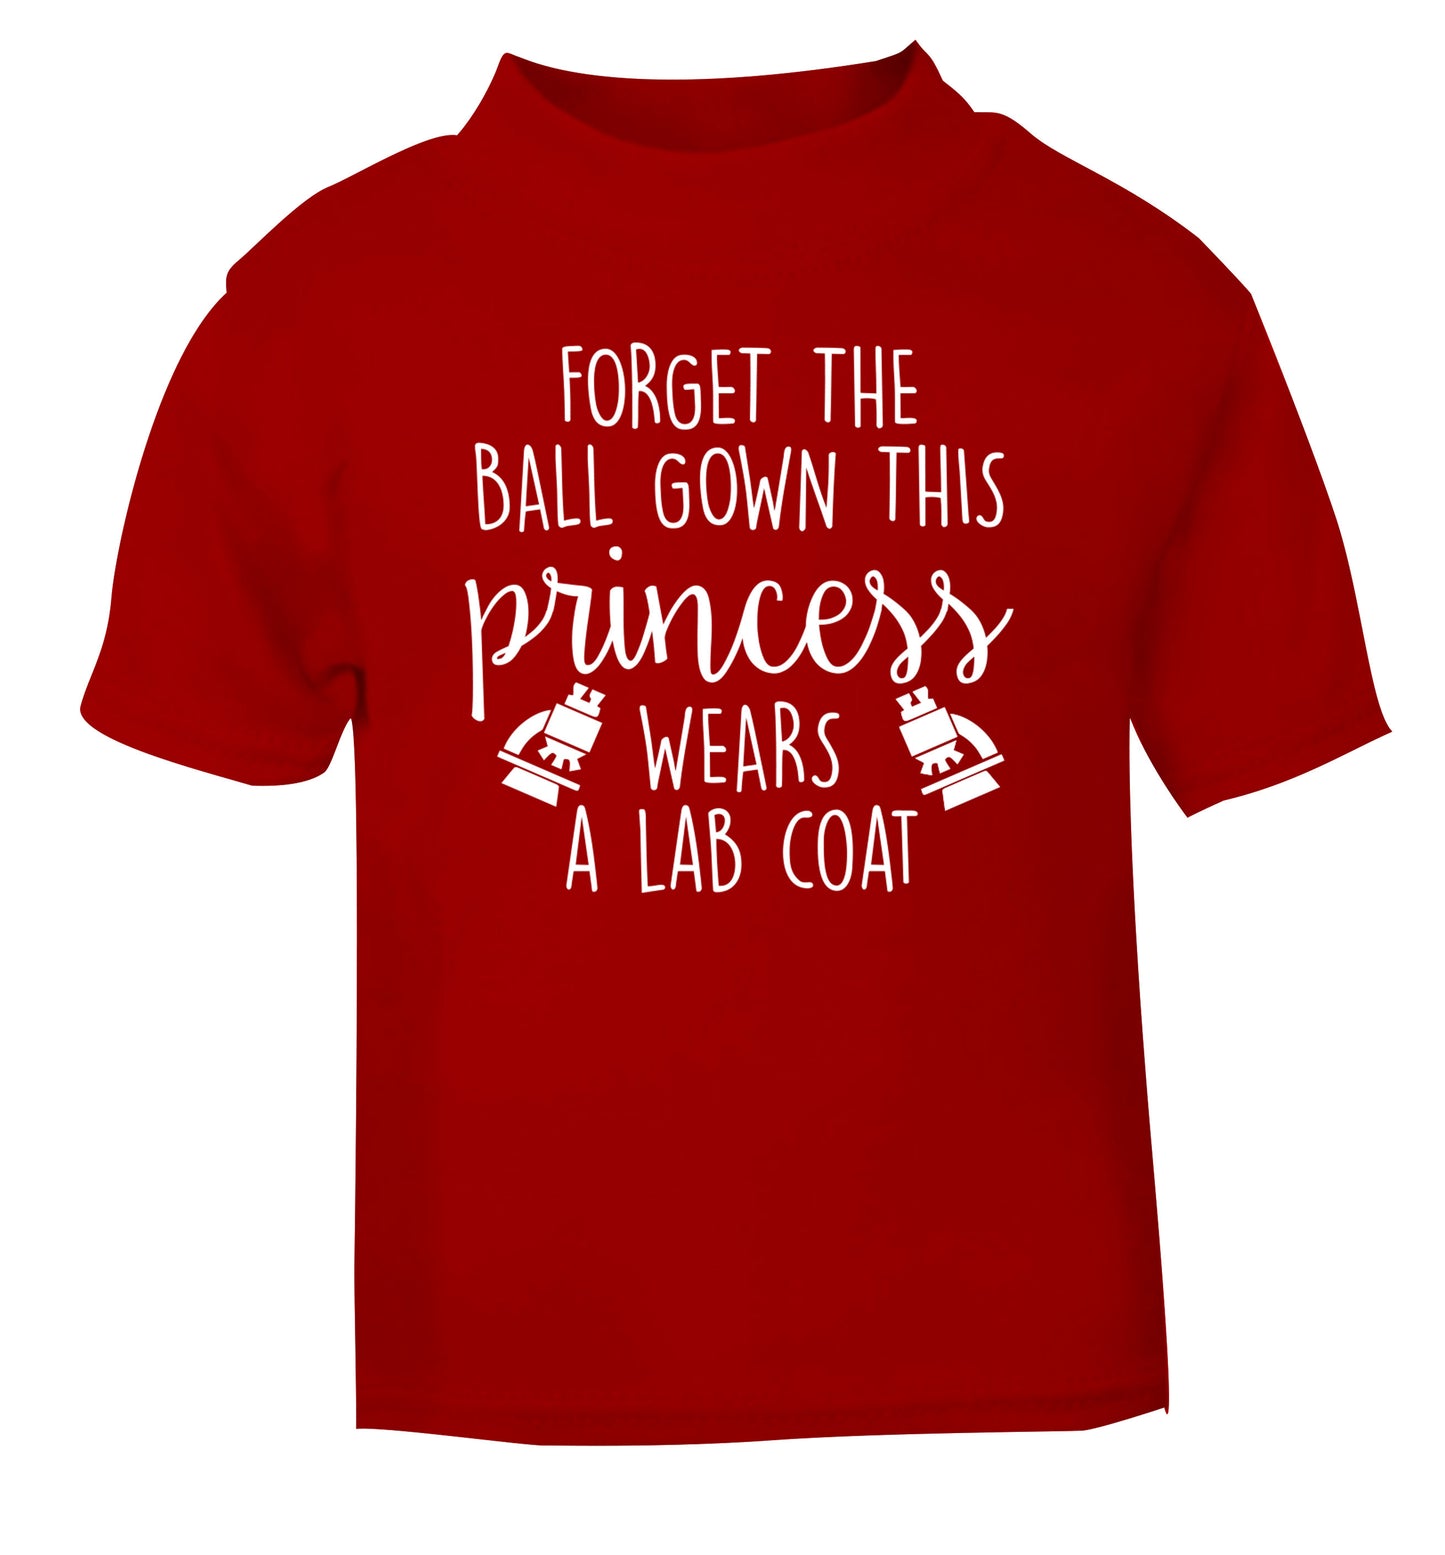 Forget the ball gown this princess wears a lab coat red Baby Toddler Tshirt 2 Years